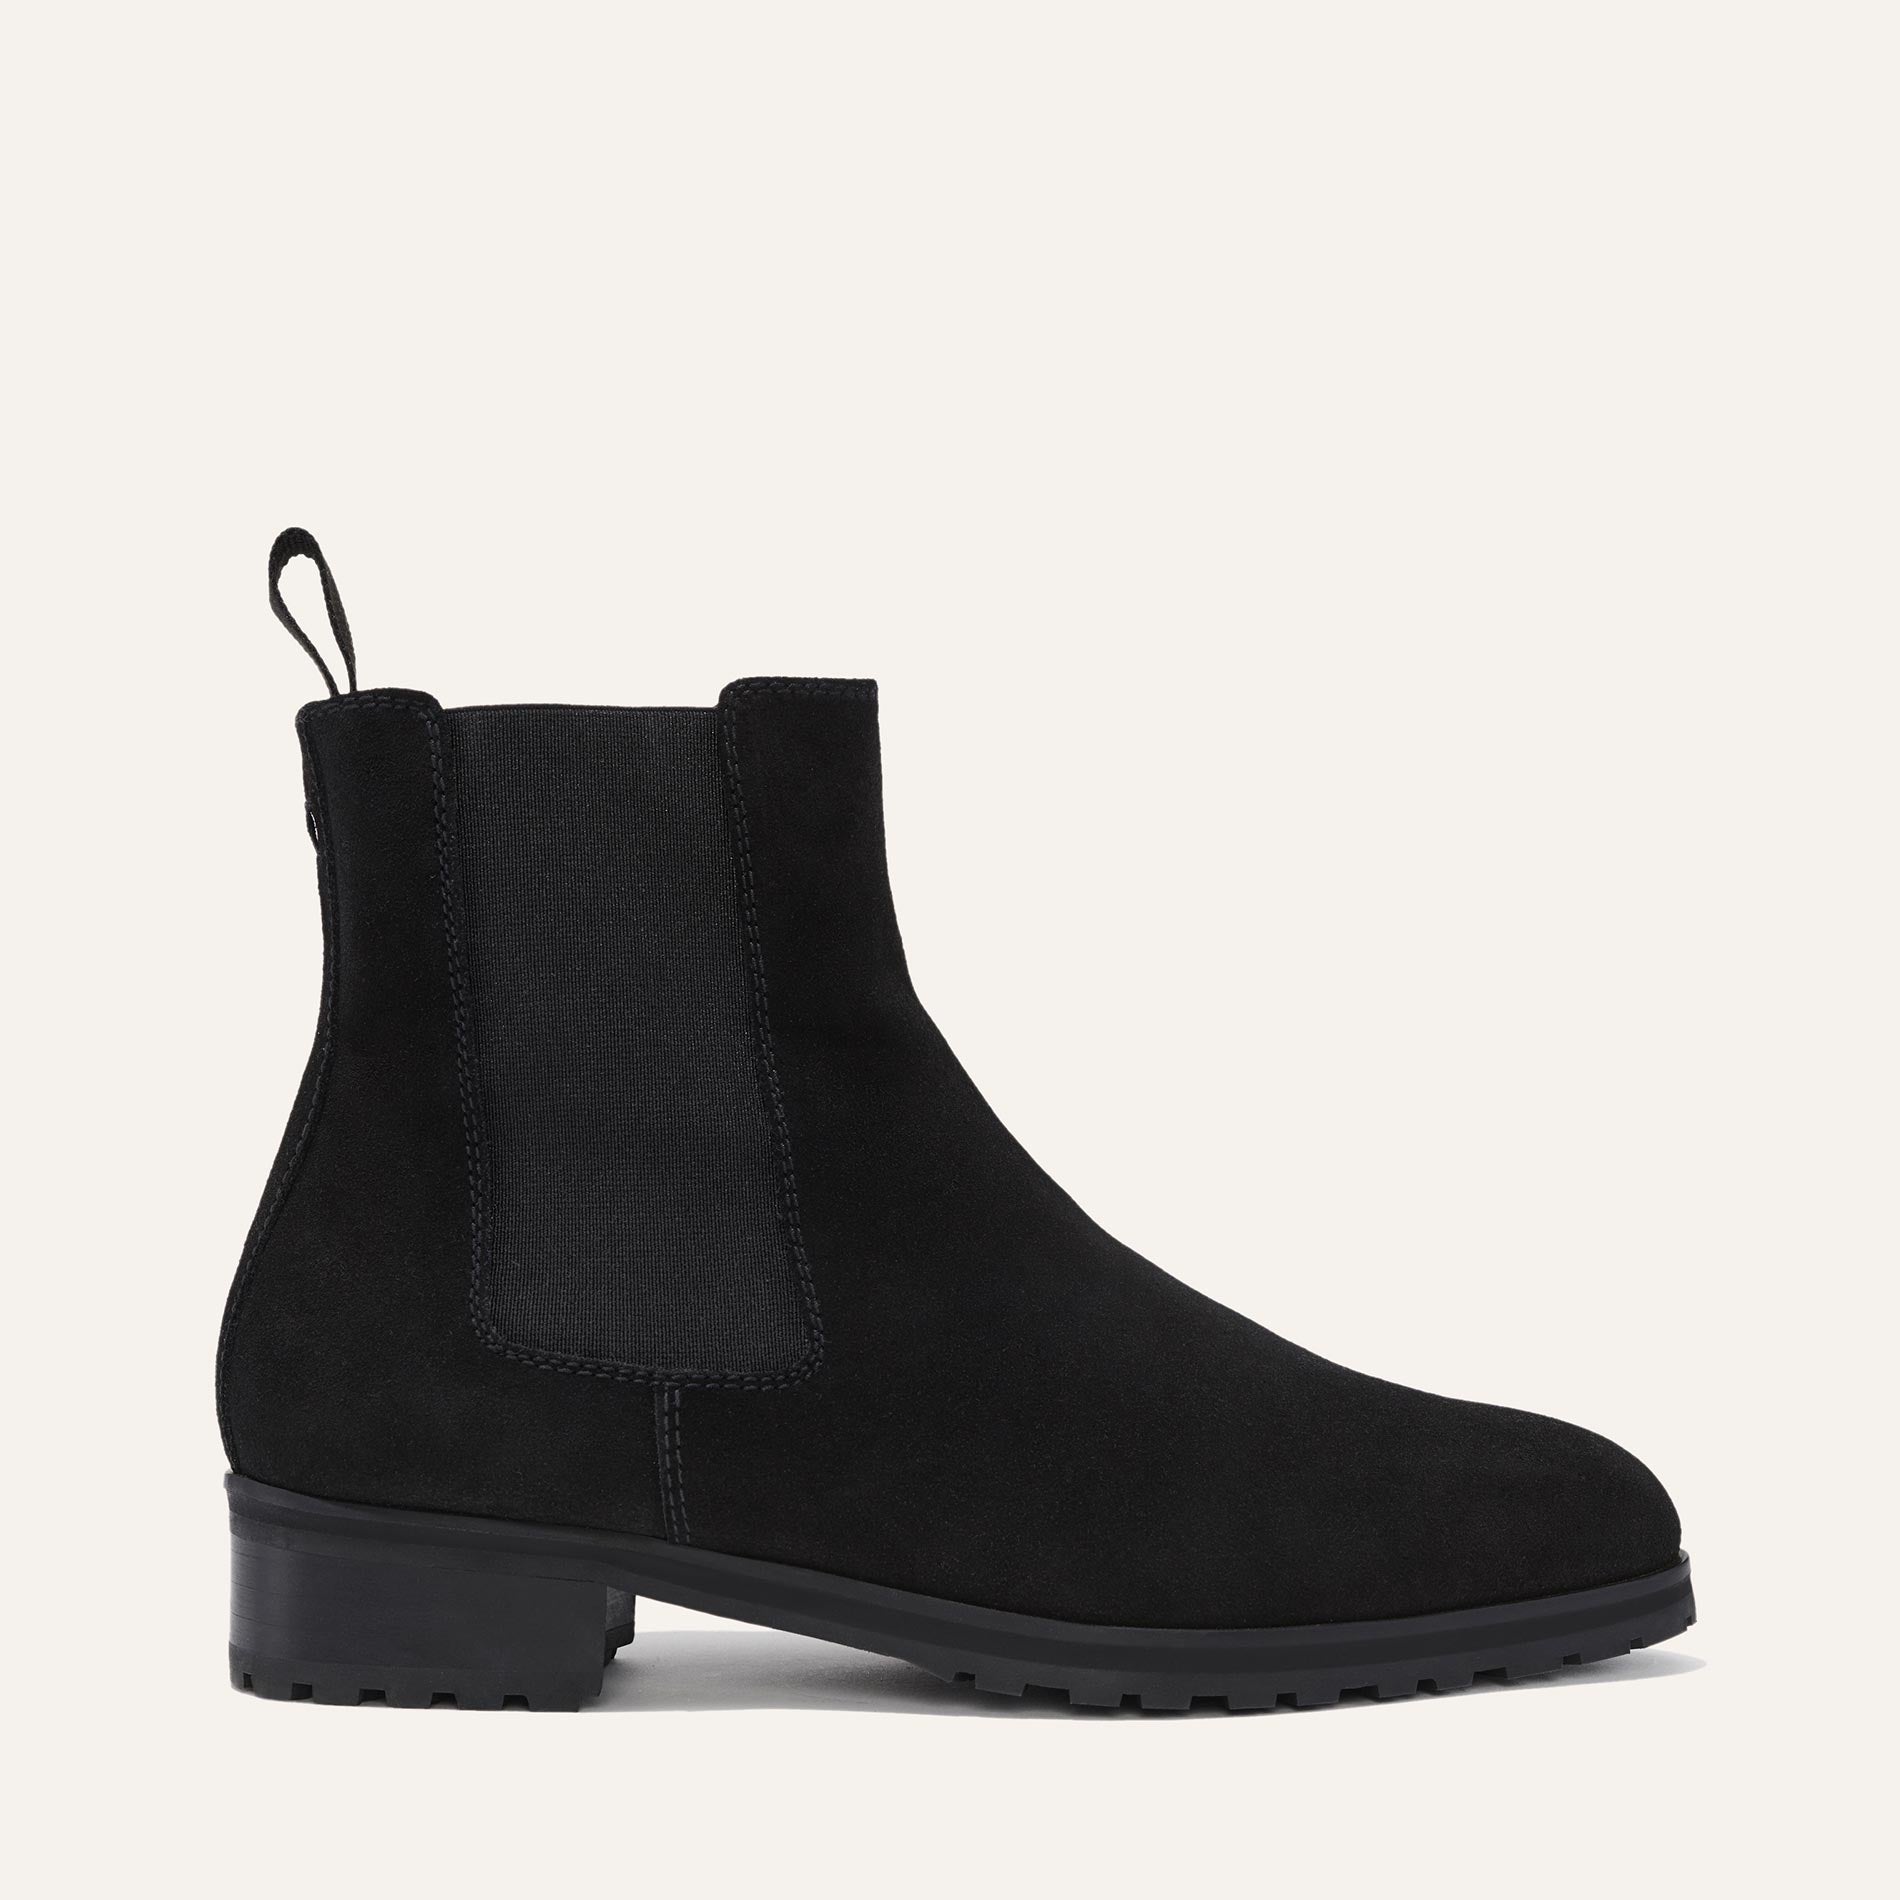 Margaux's classic Chelsea Boot in weatherproof, black German suede with a rubber lug sole and tapered toe